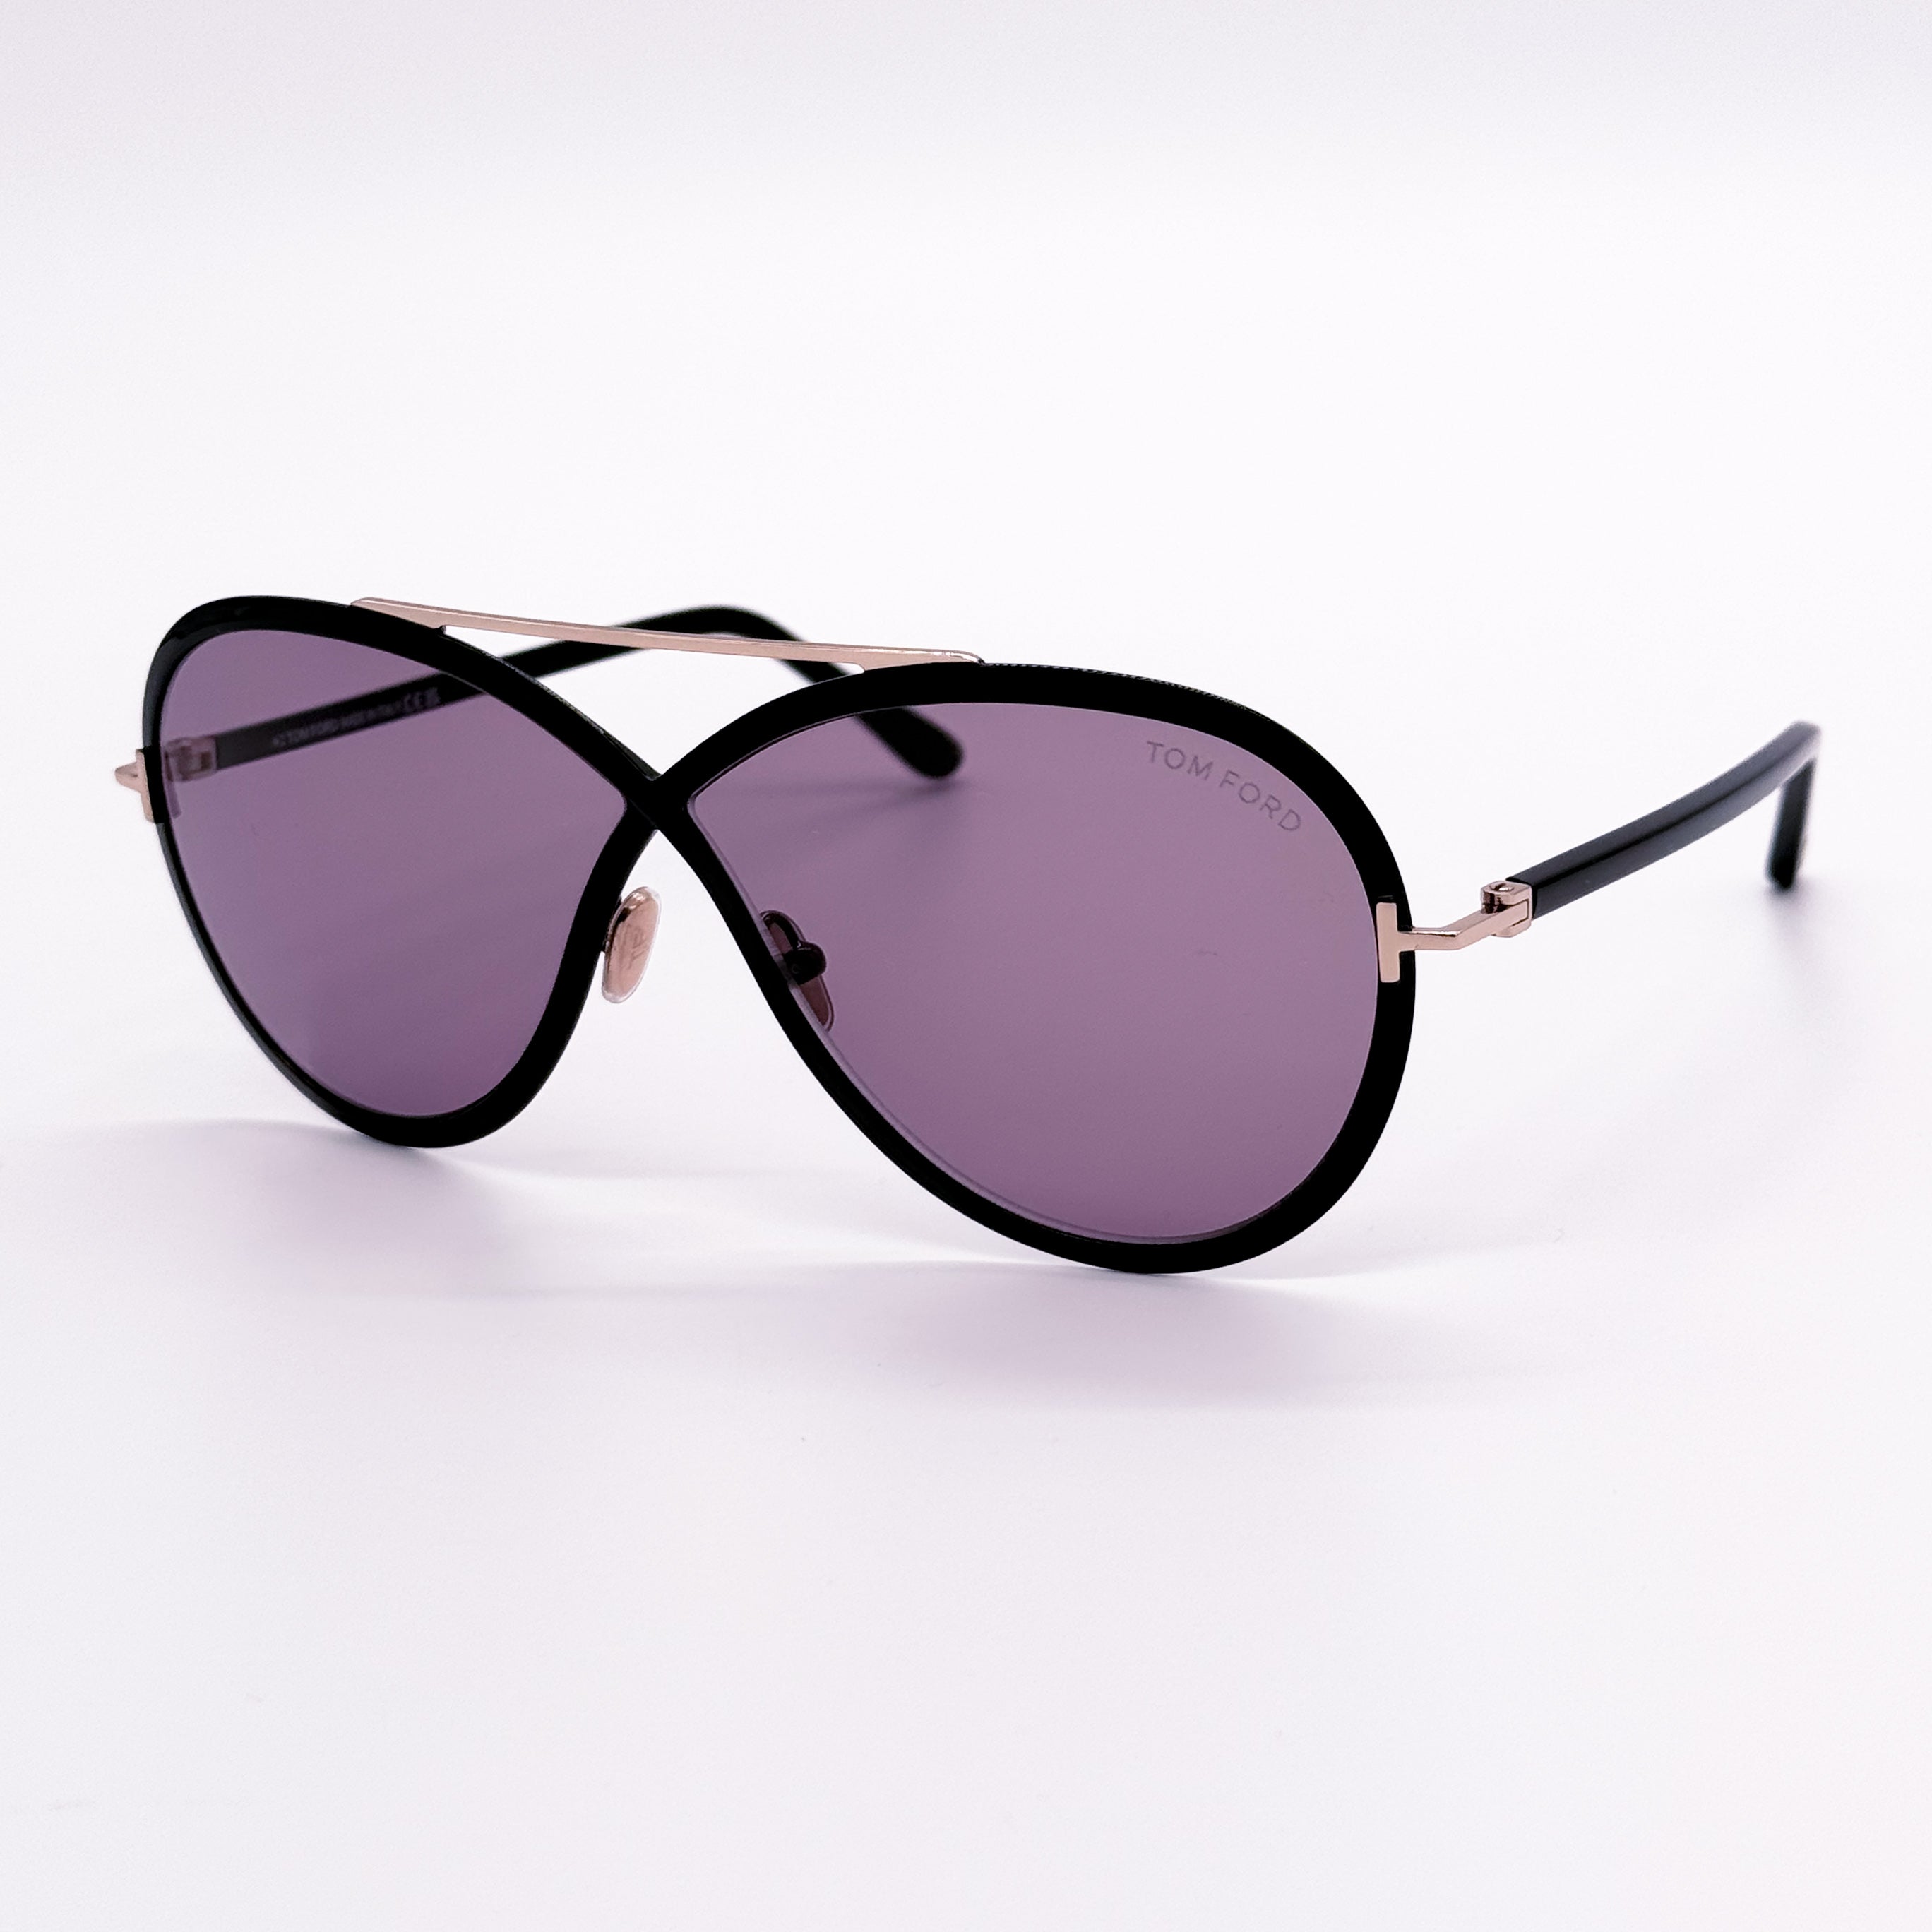 TOM FORD RICKIE TF1007 01Y SUNGLASSES FT1007